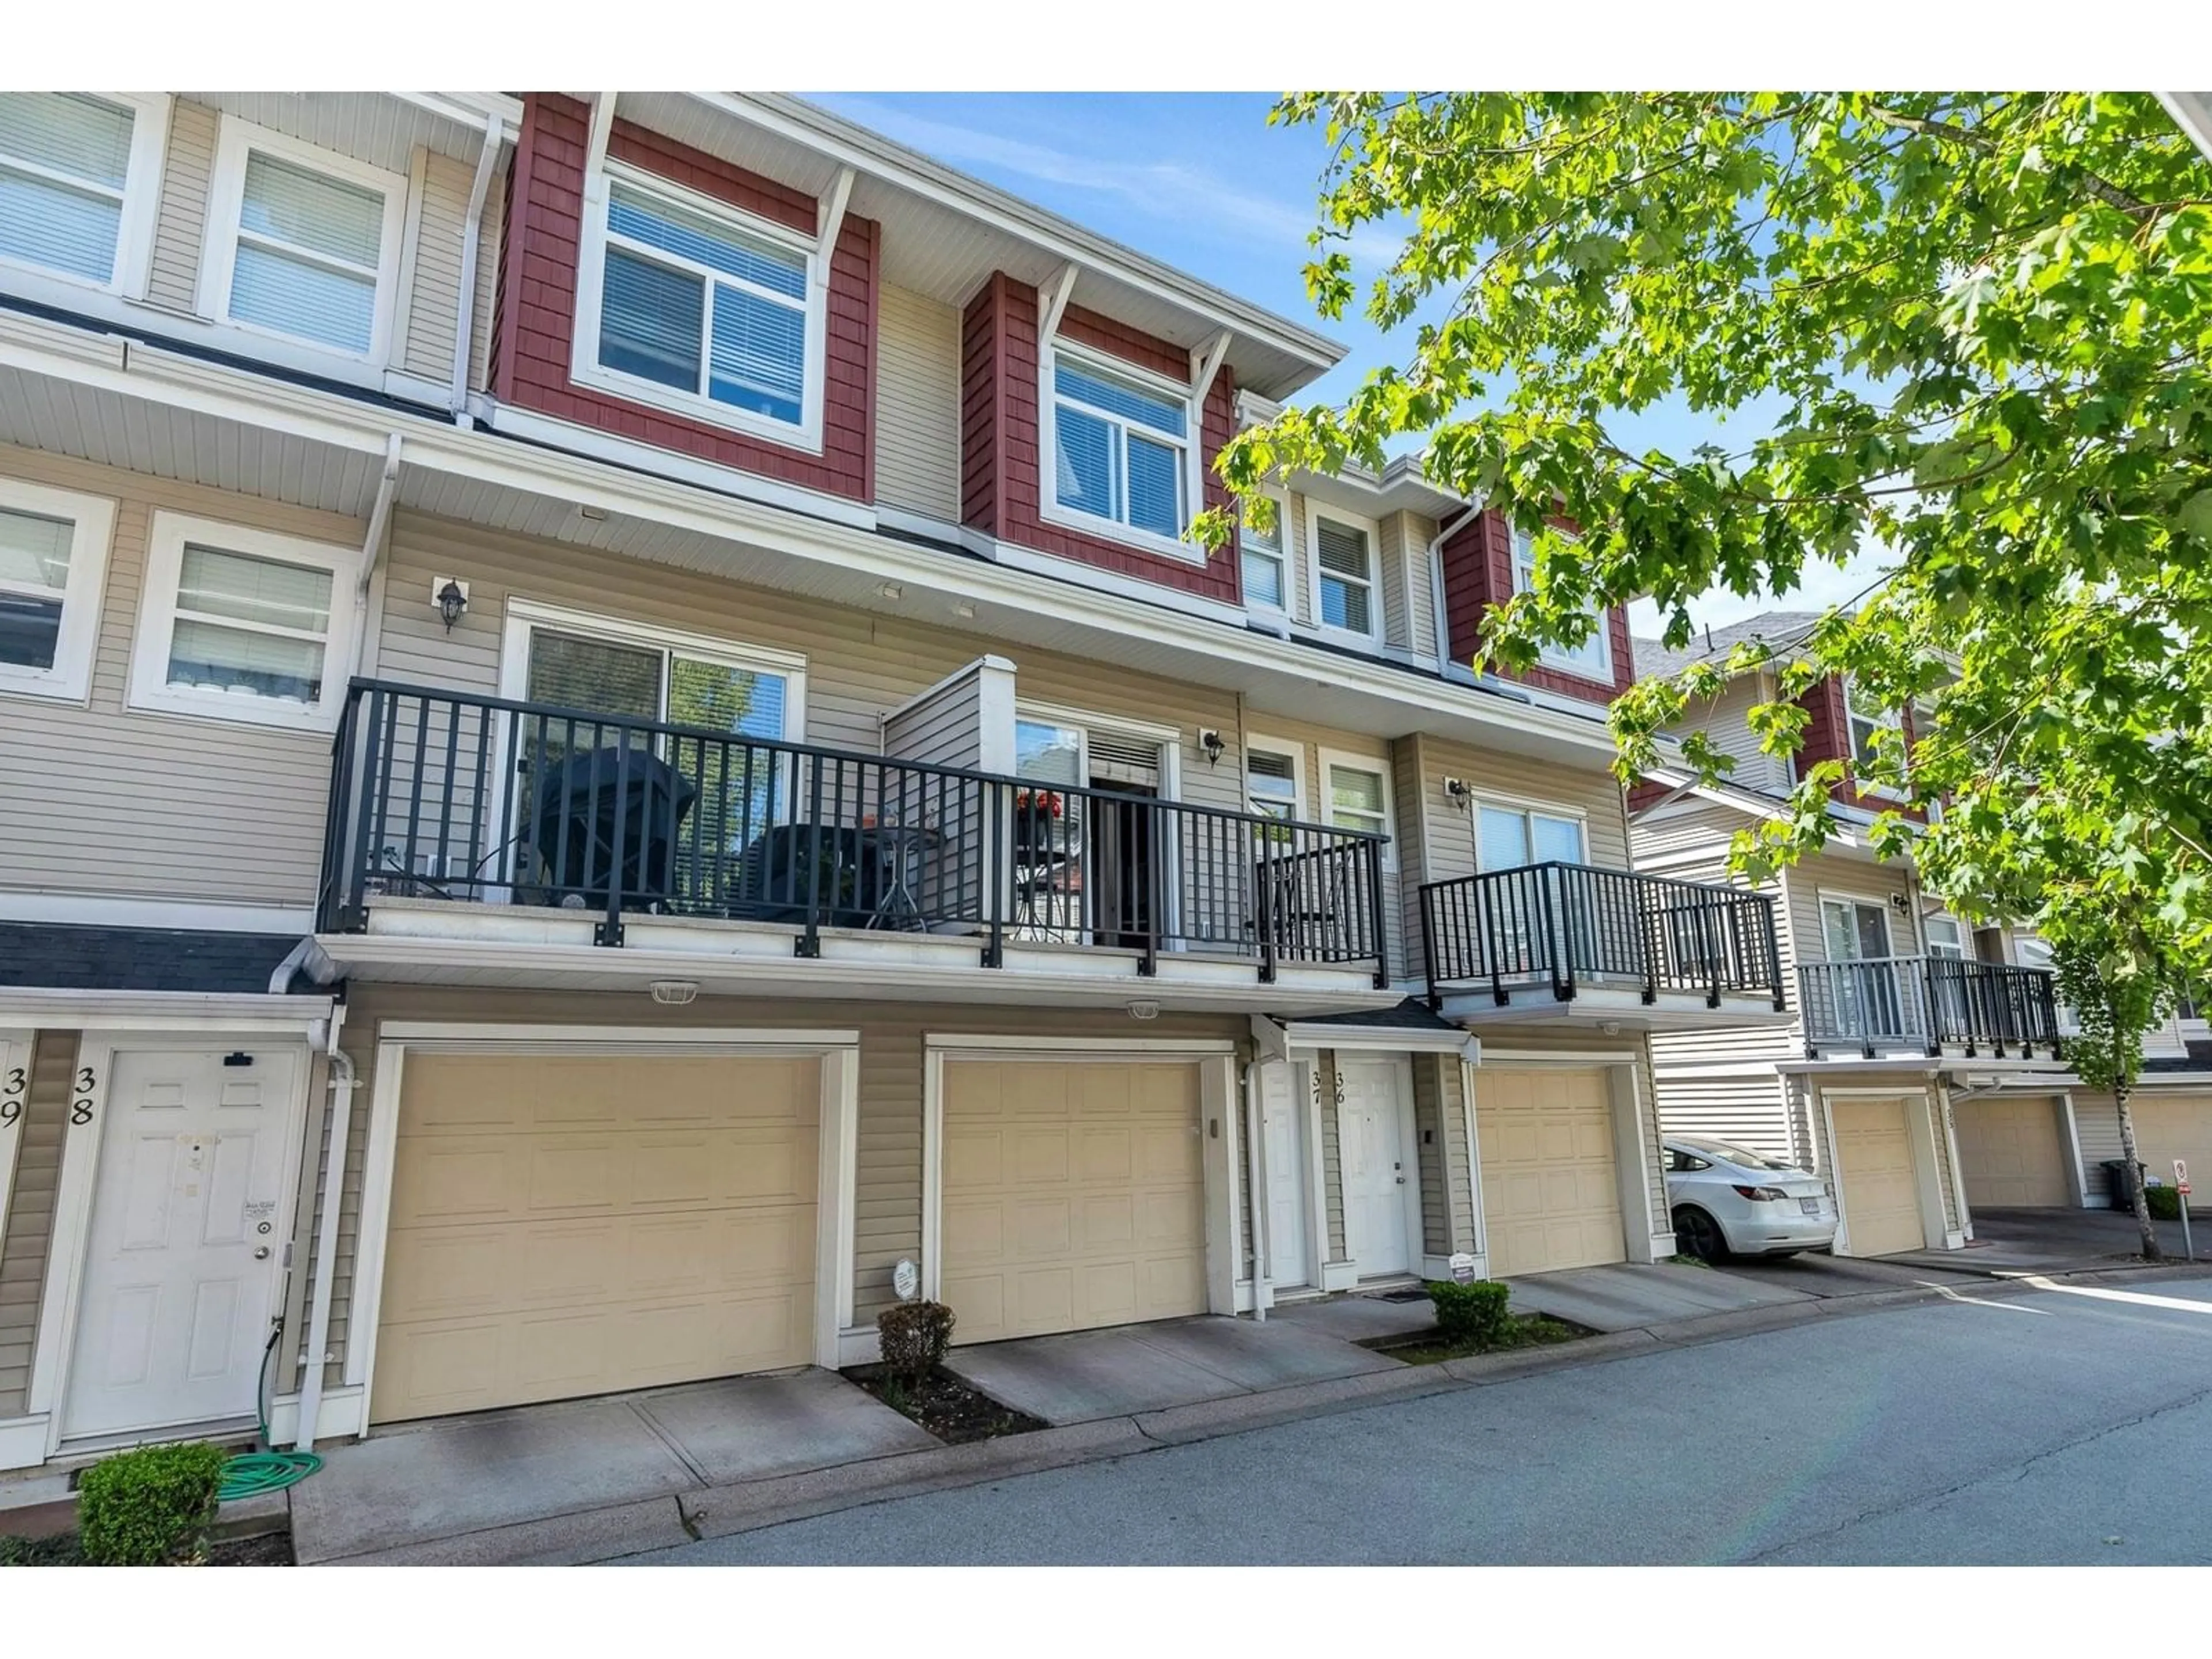 A pic from exterior of the house or condo for 37 8655 159 STREET, Surrey British Columbia V4N1M8